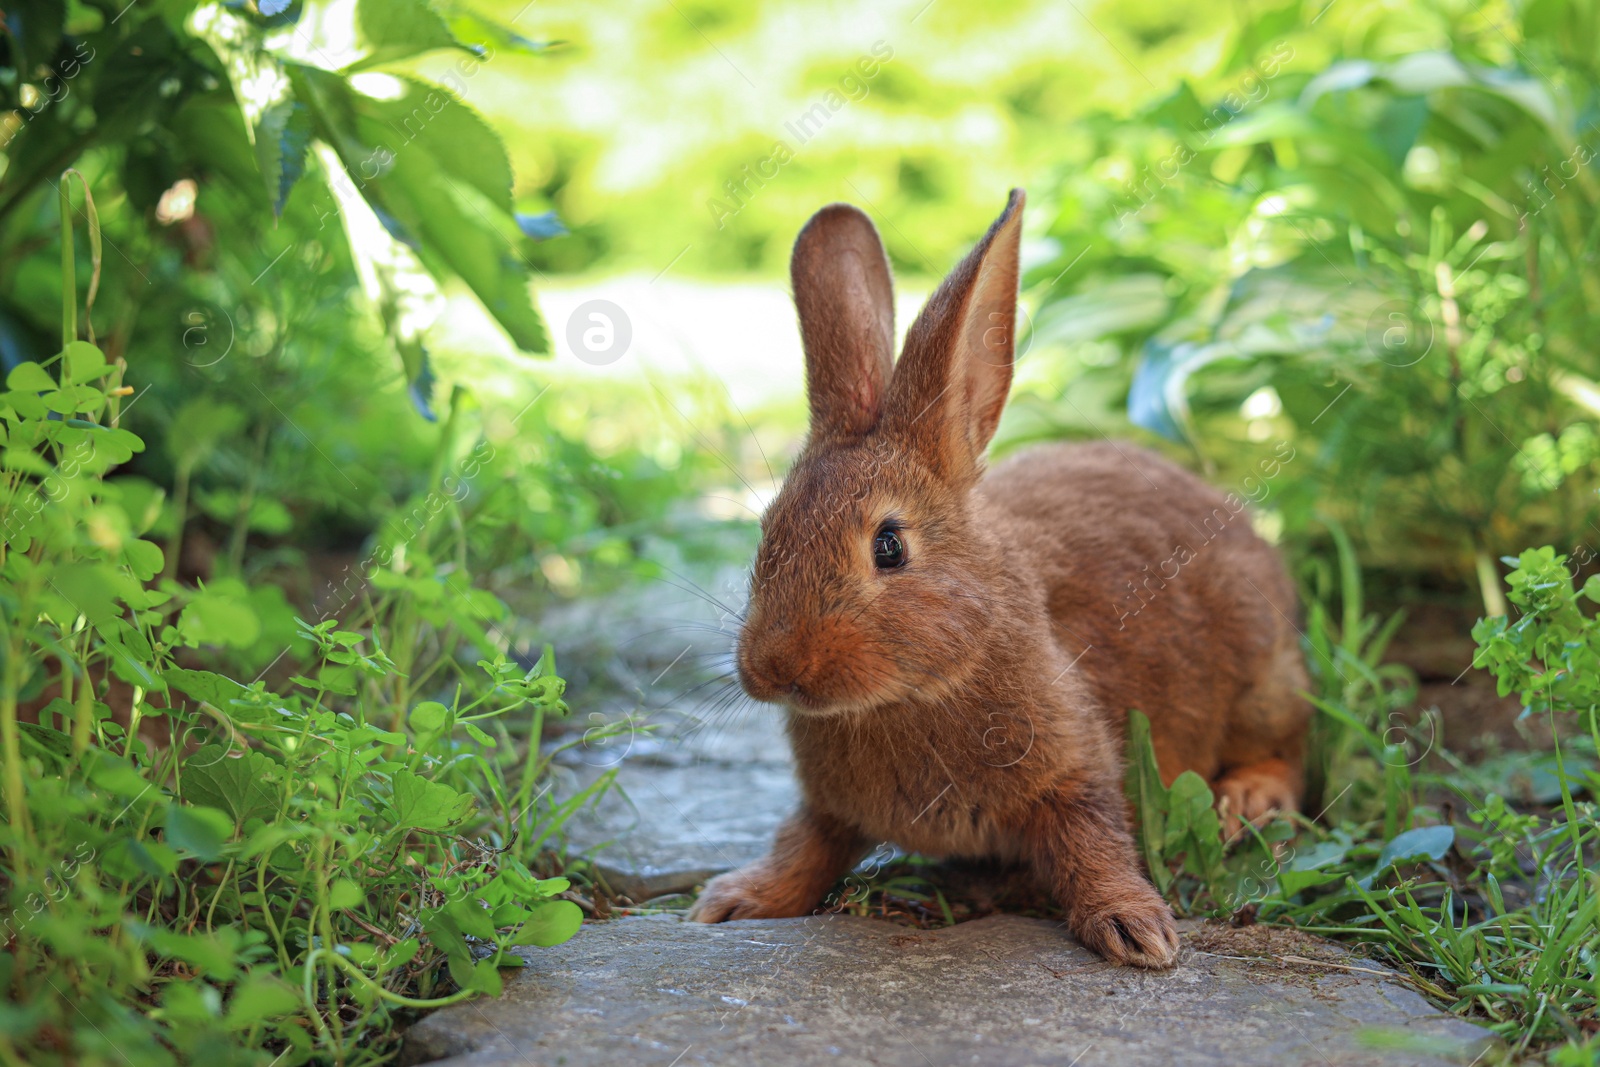 Photo of Cute fluffy rabbit on paved path in garden